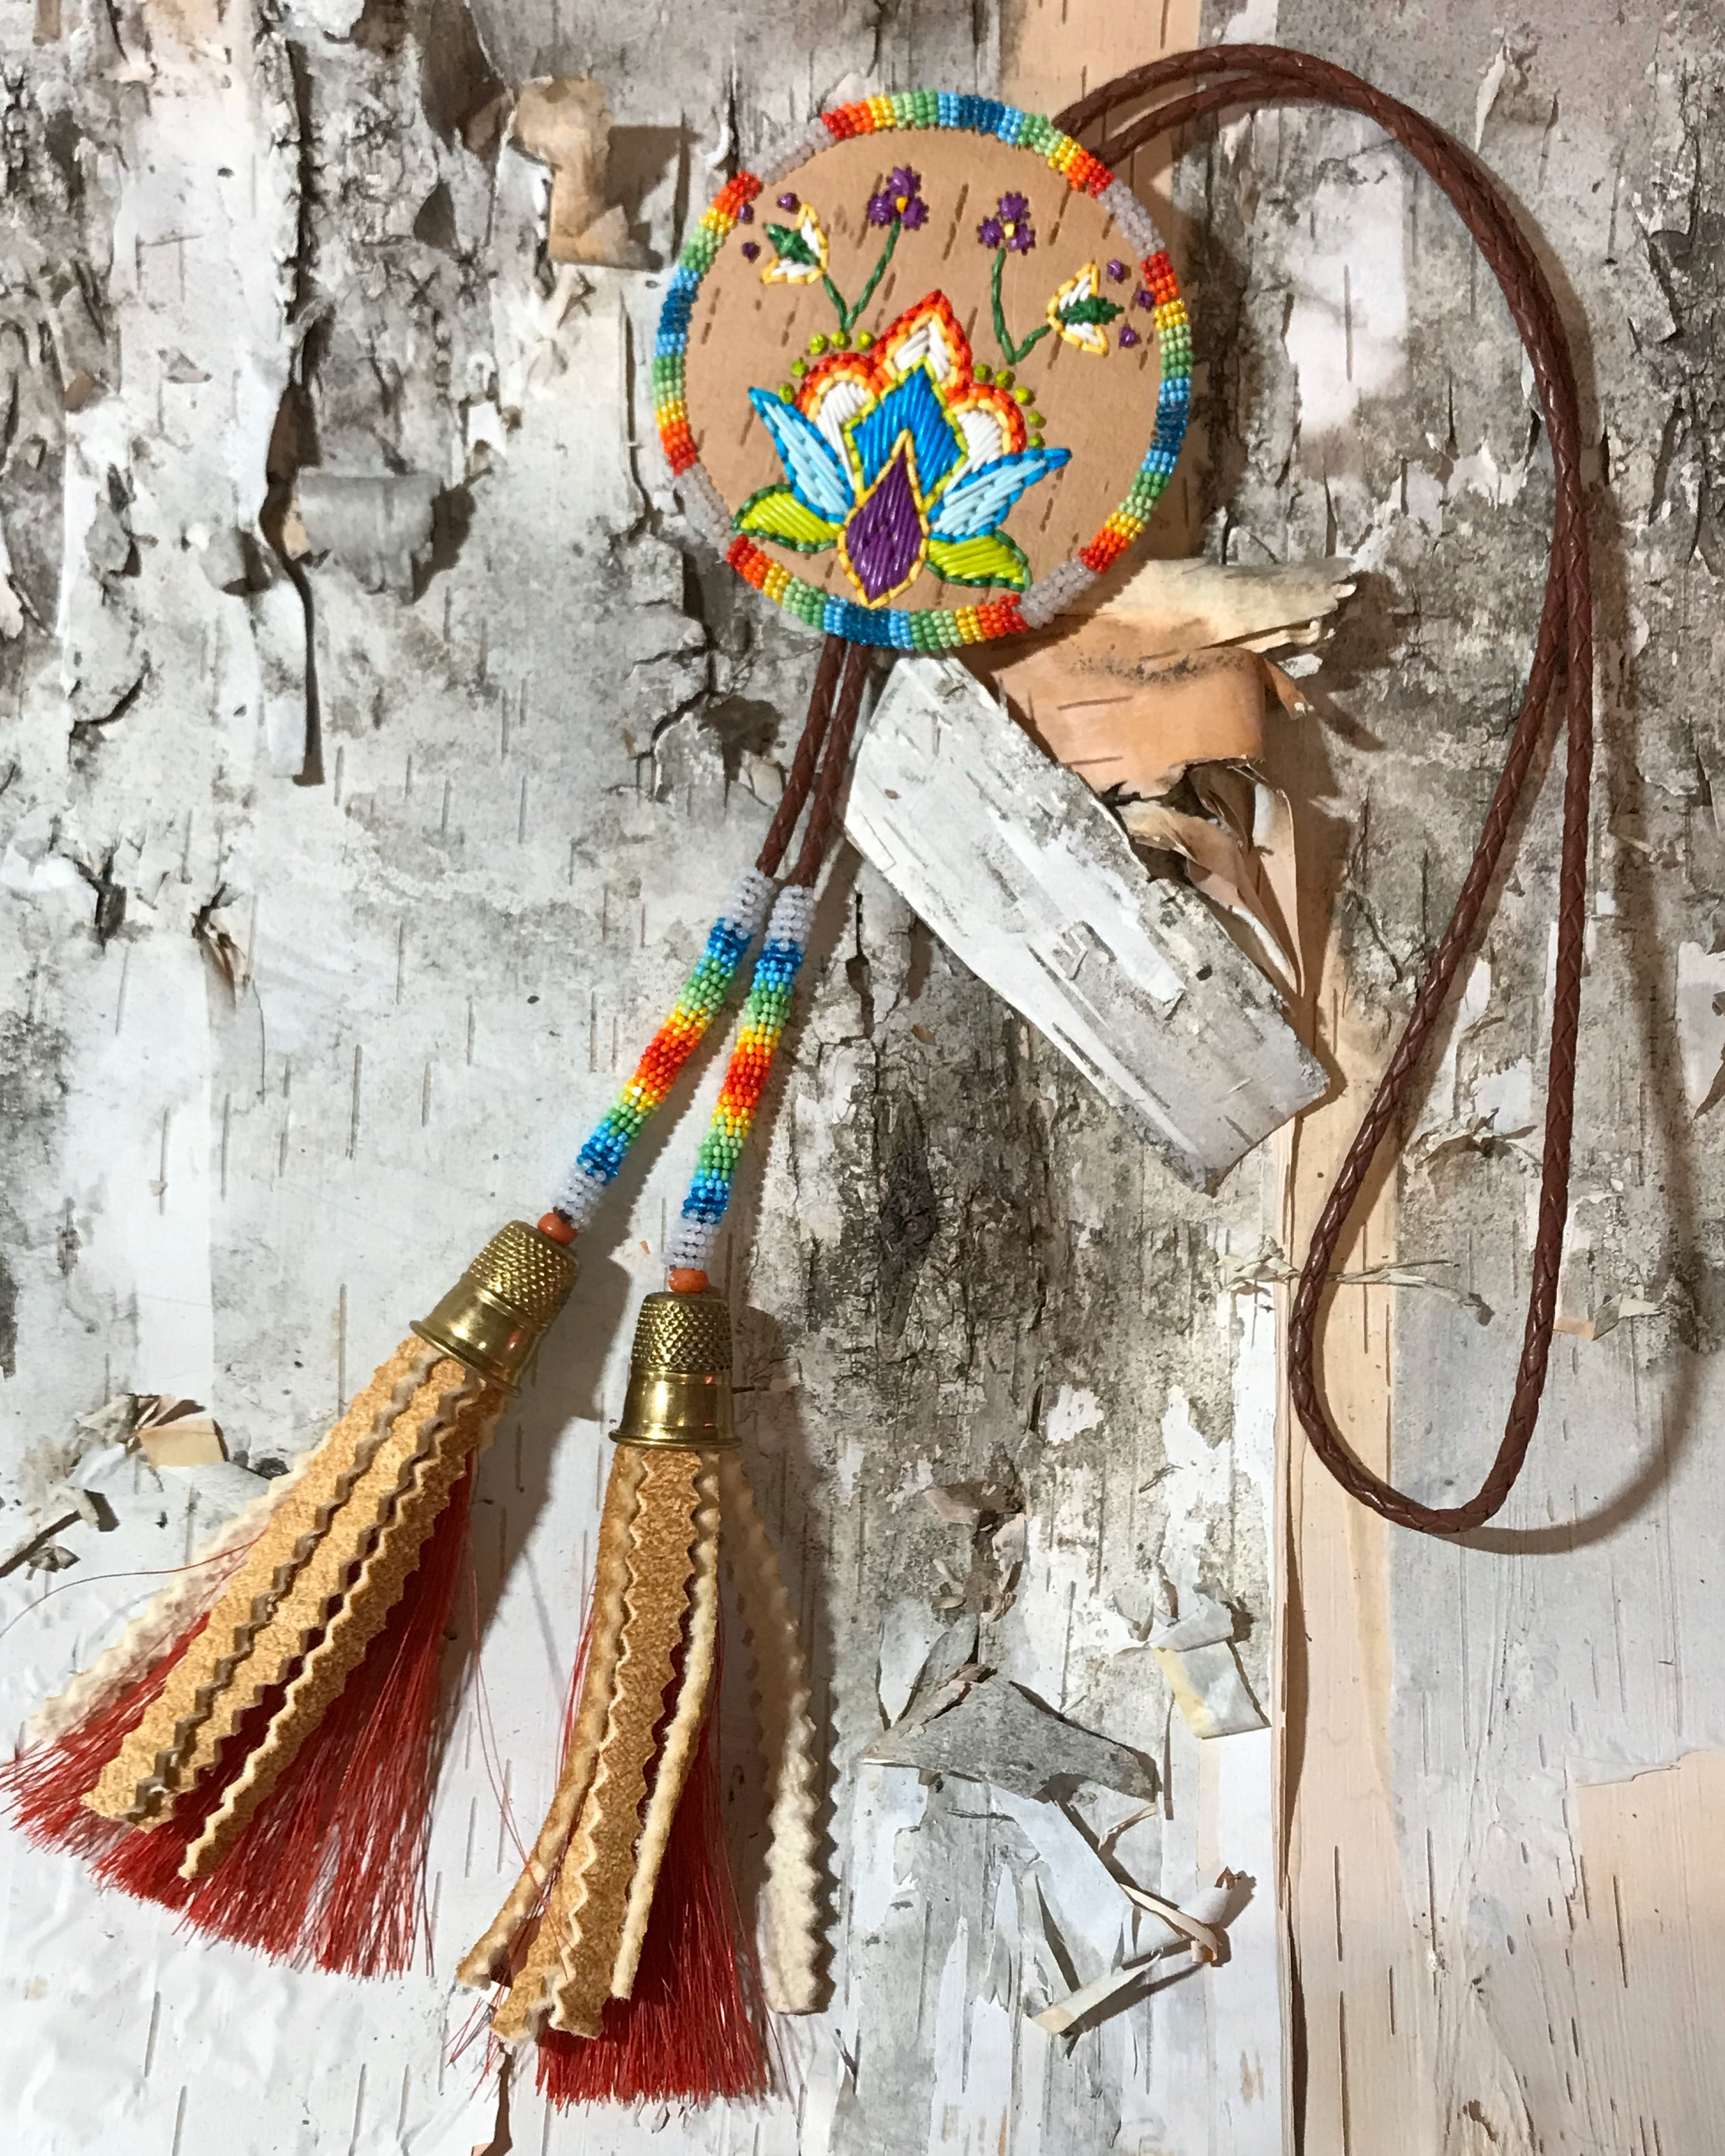 Handmade, embroidered, beaded accessory made by woodland quillwork